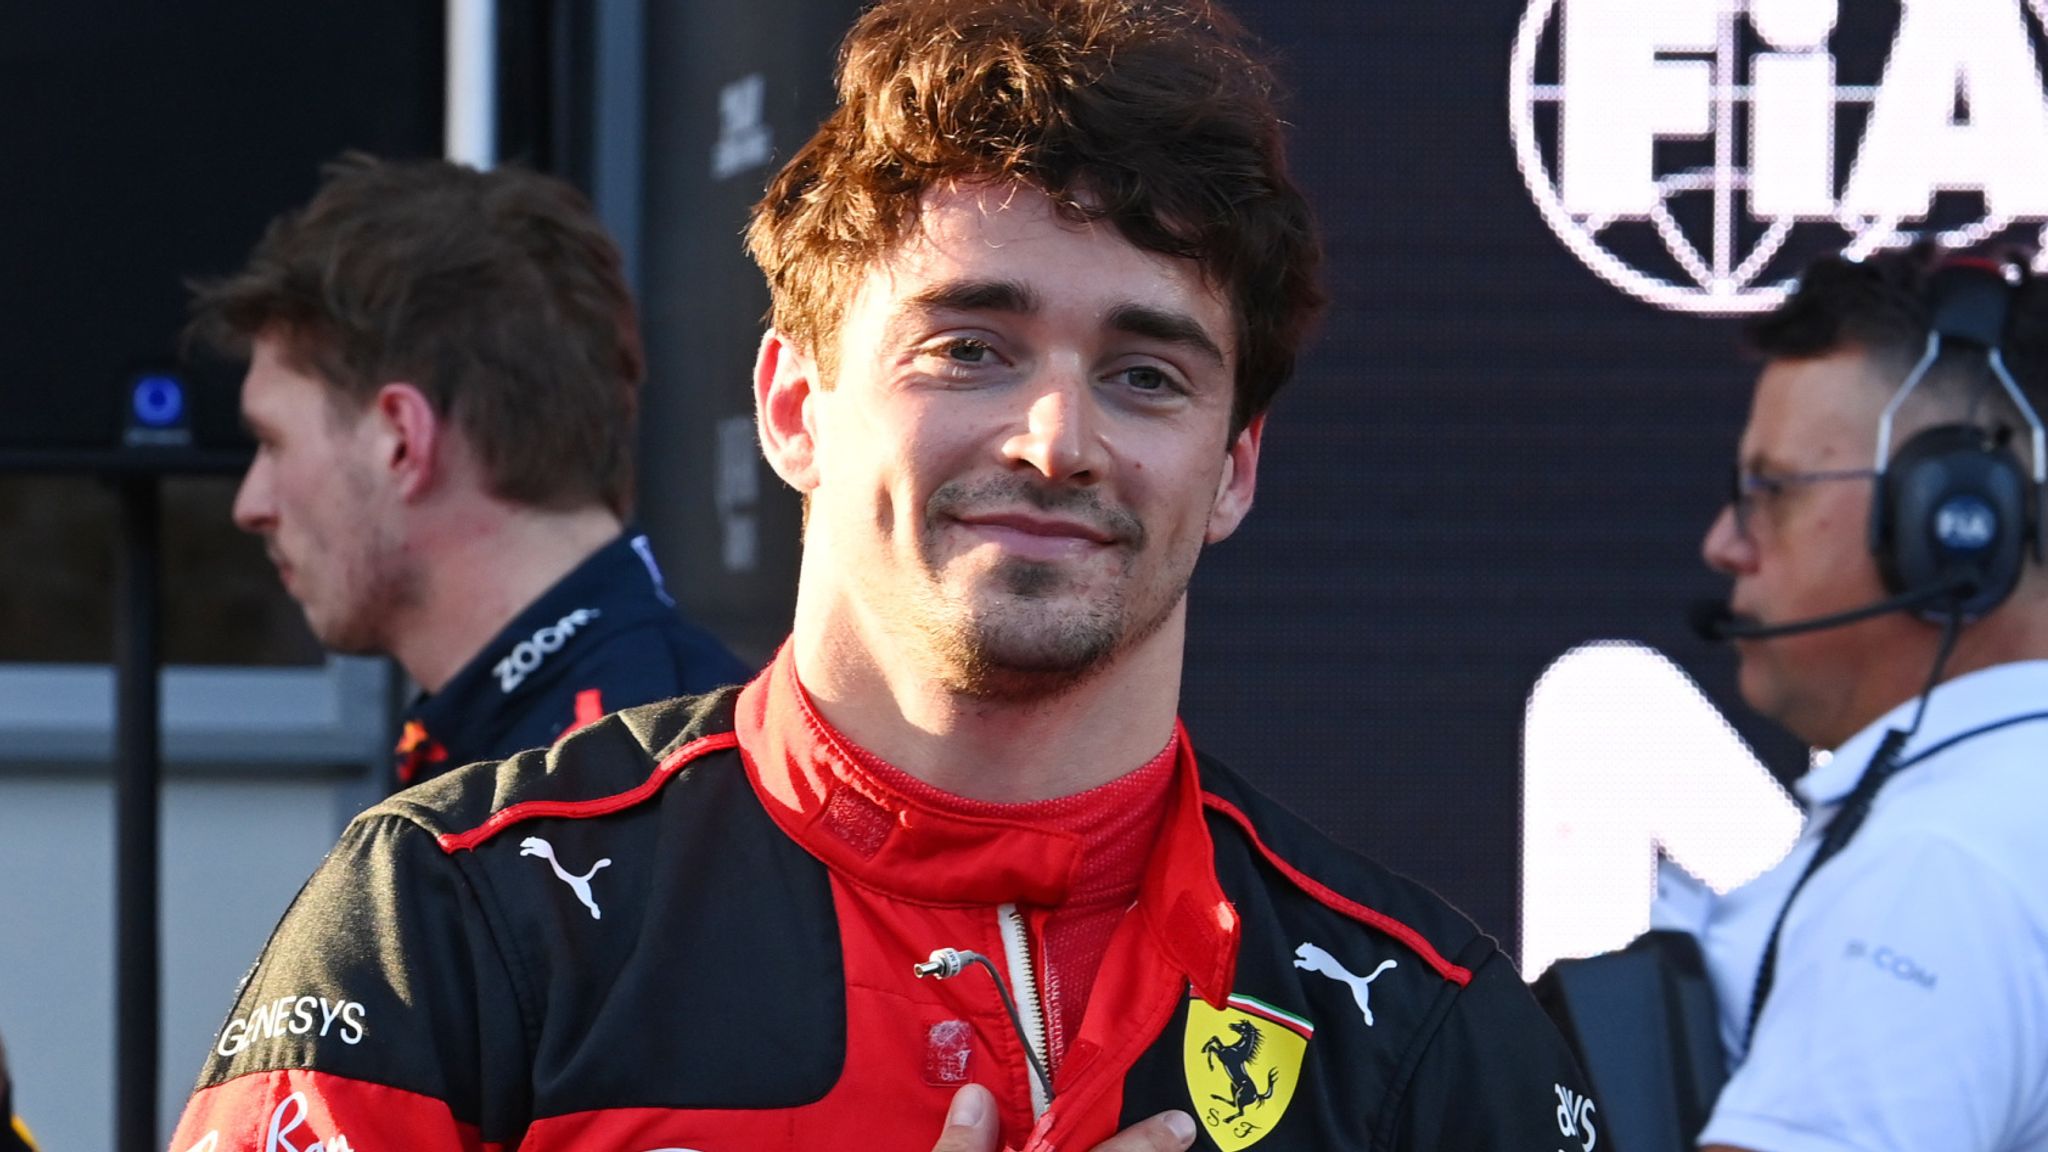 Charles Leclerc has extended his contract with Ferrari